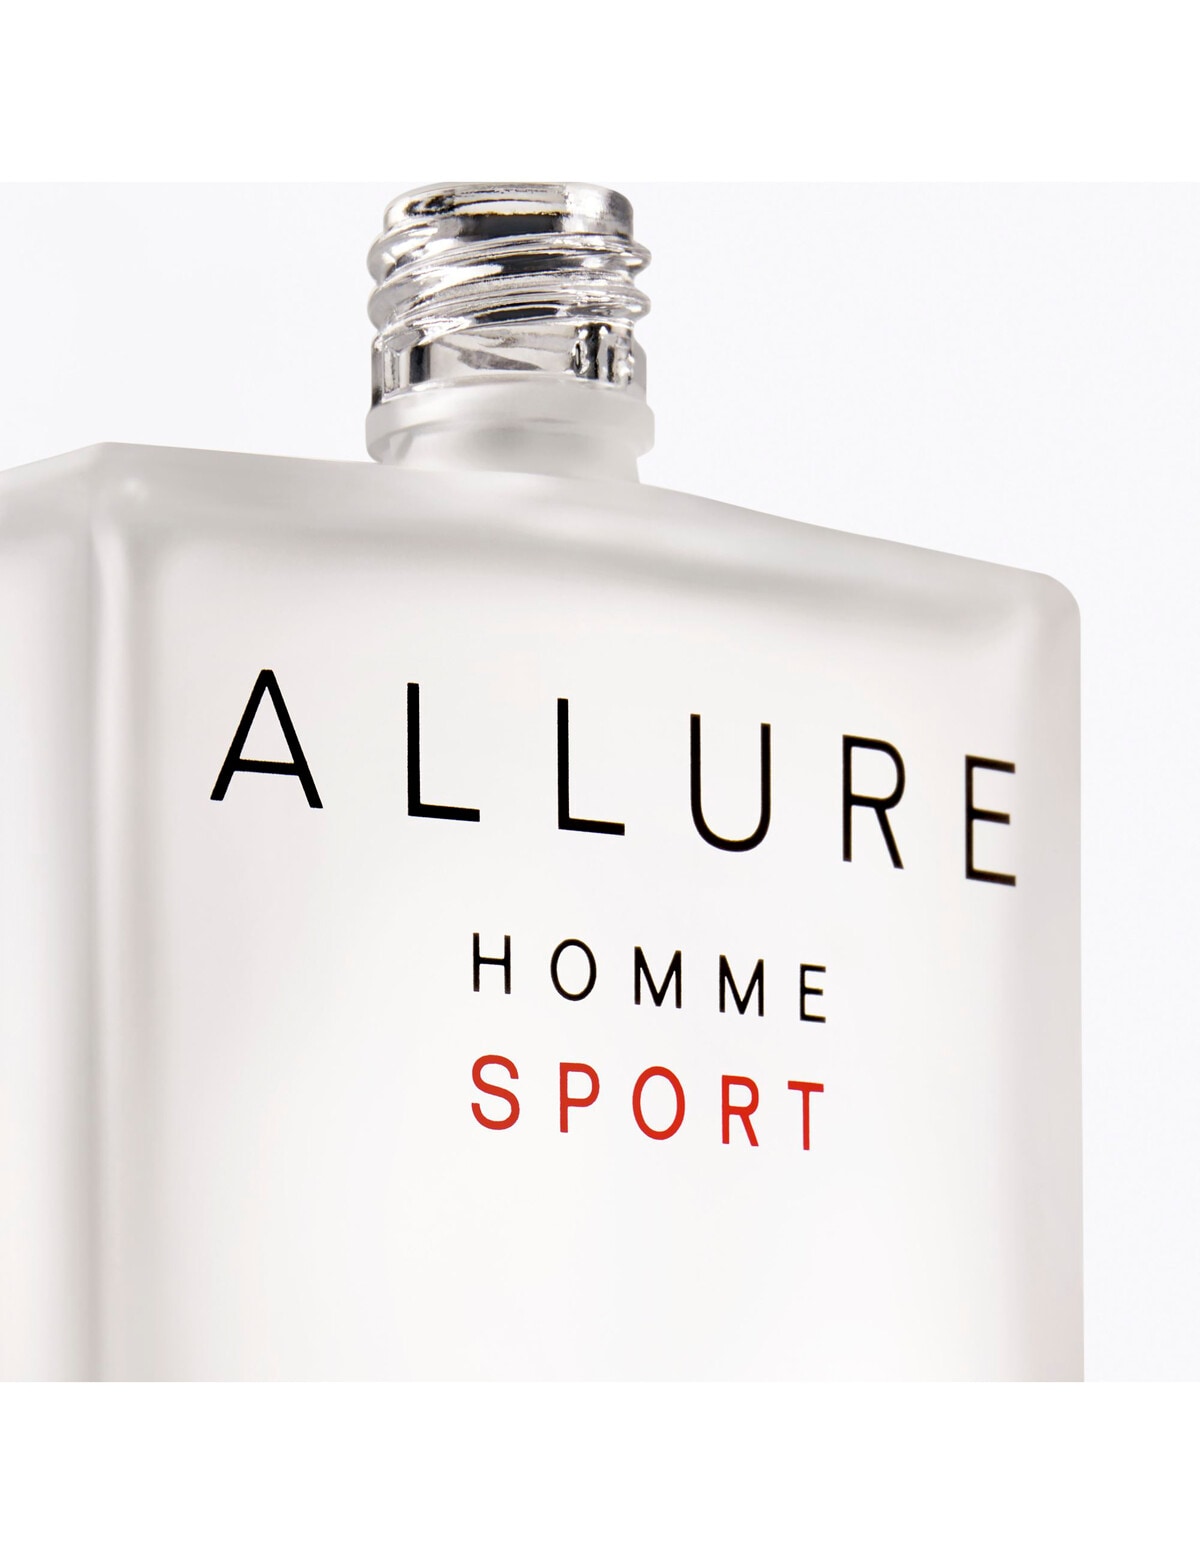 CHANEL ALLURE HOMME SPORT After Shave Lotion 100ml - ALLURE HOMME